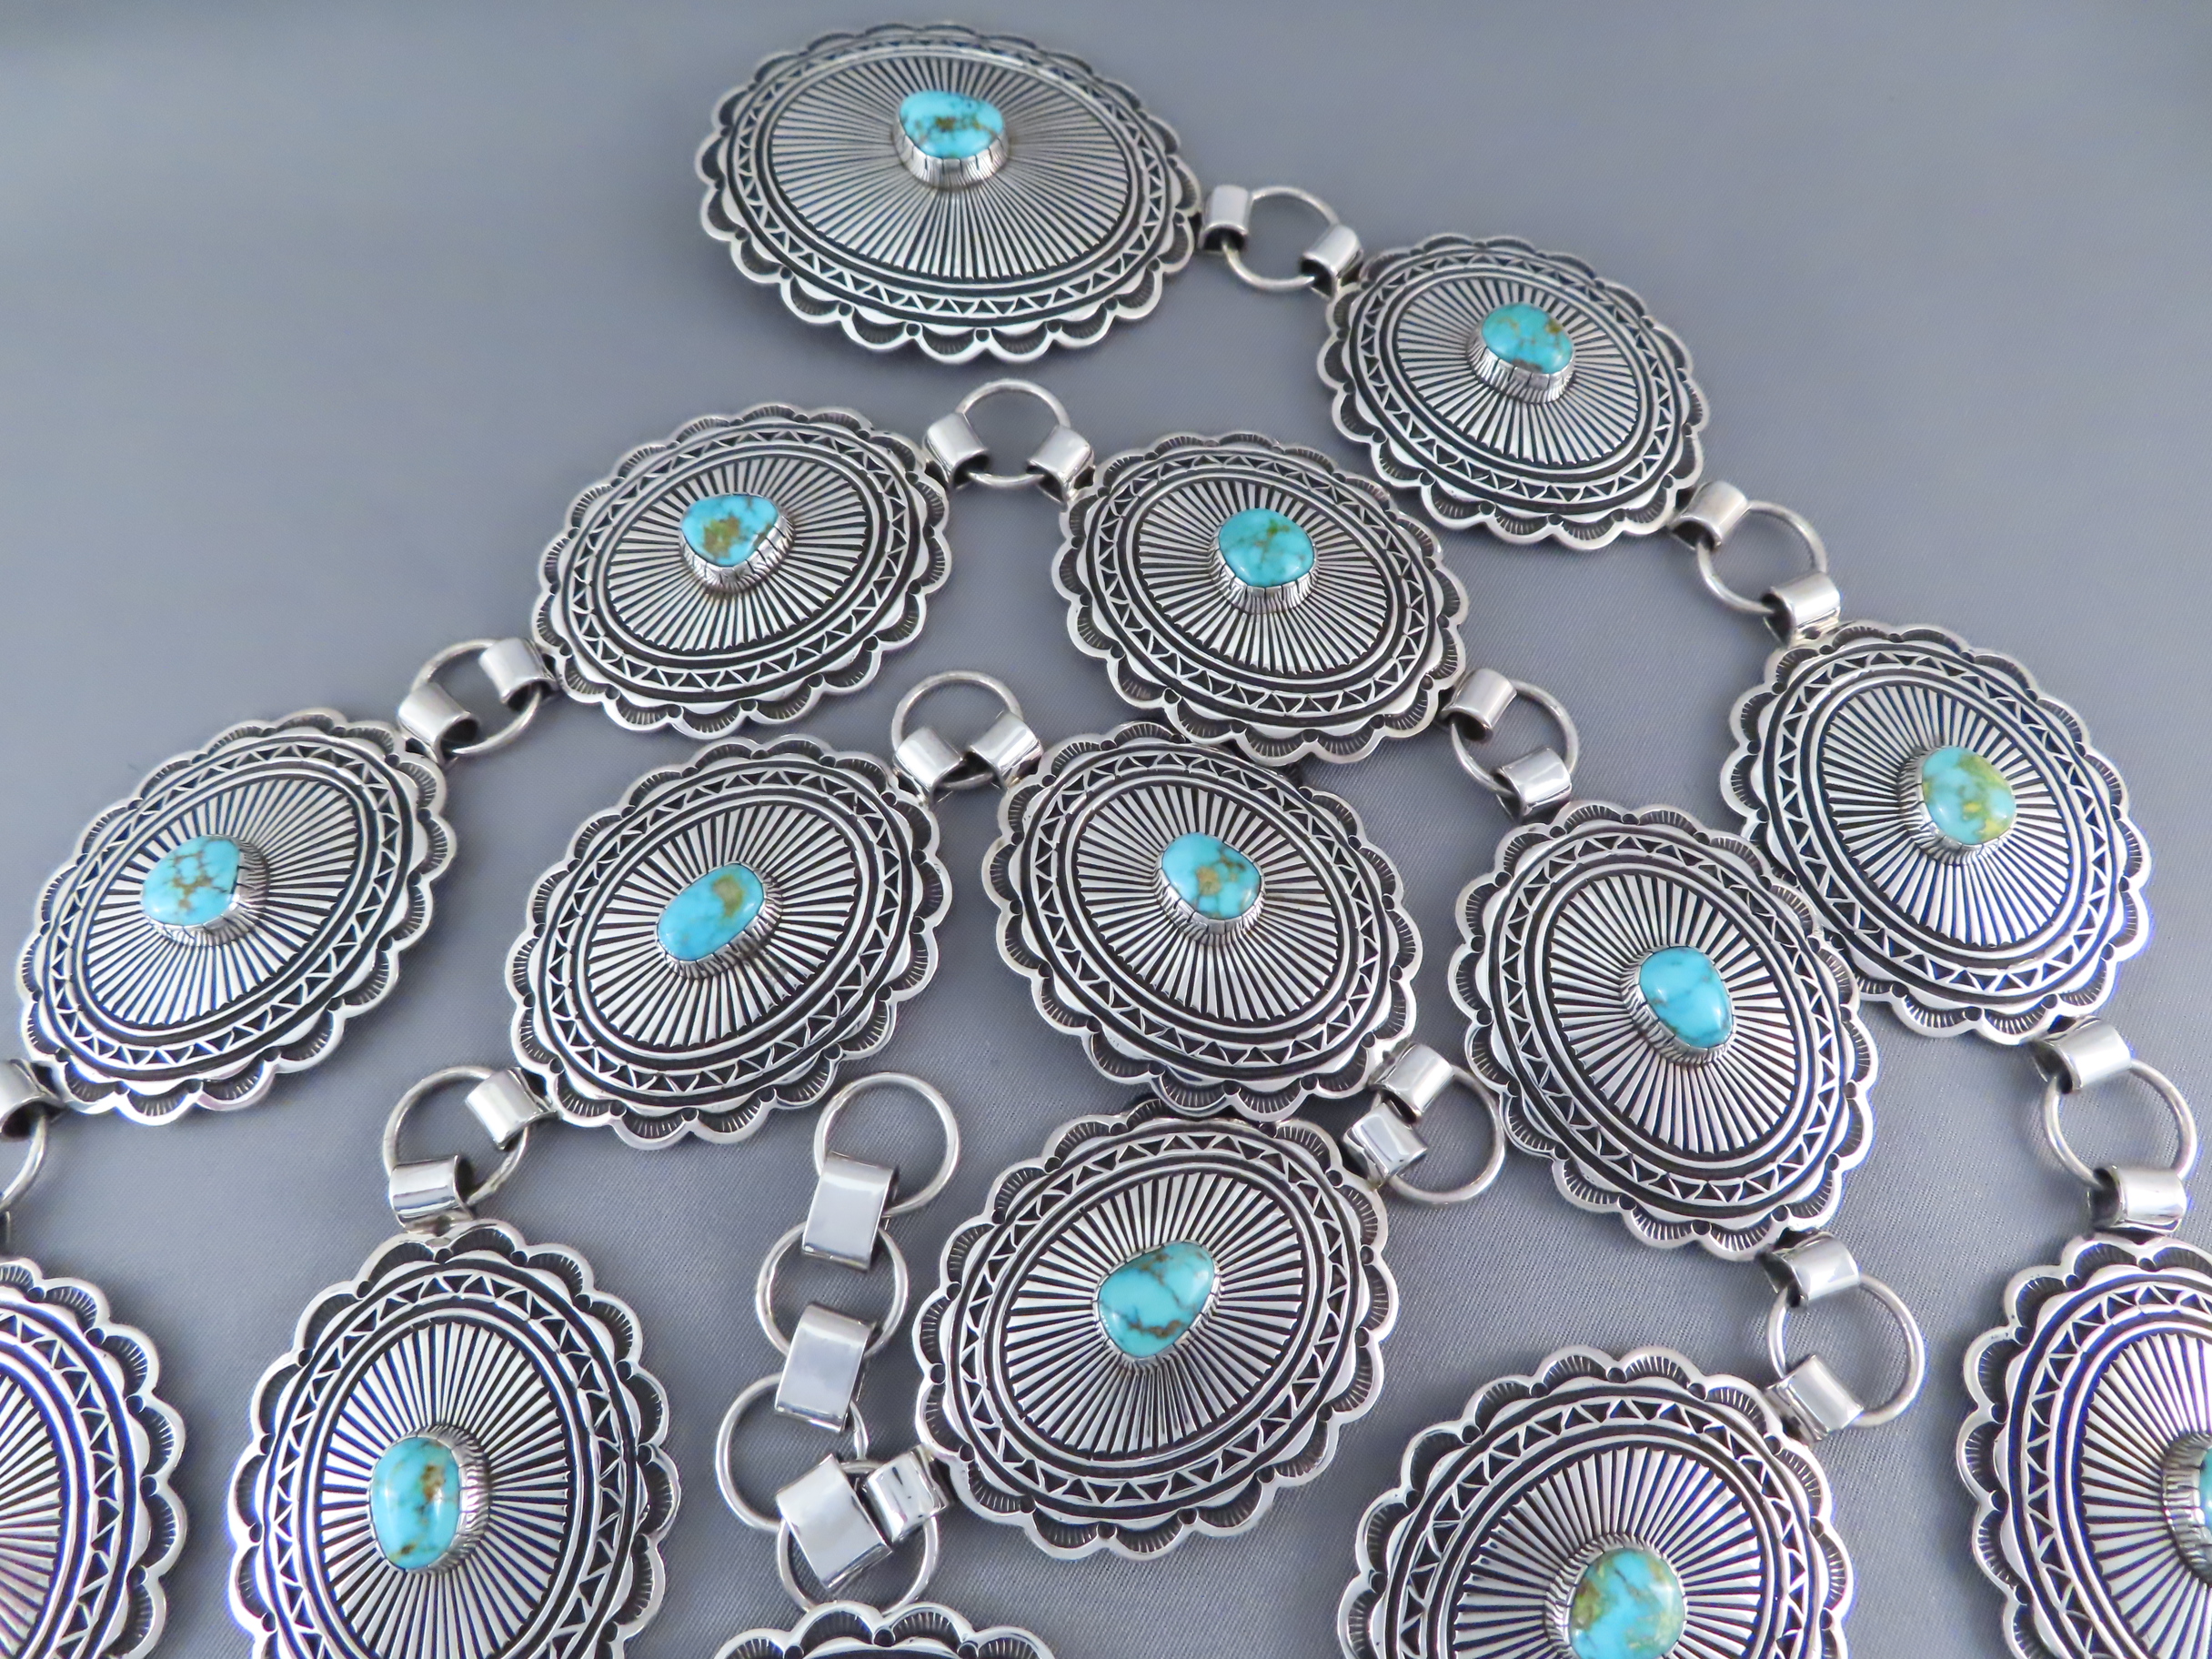 Smaller Turquoise Mountain Turquoise Link Concho Belt by Native American (Navajo) jewelry artist, Tsosie Orville White FOR SALE $3,600-